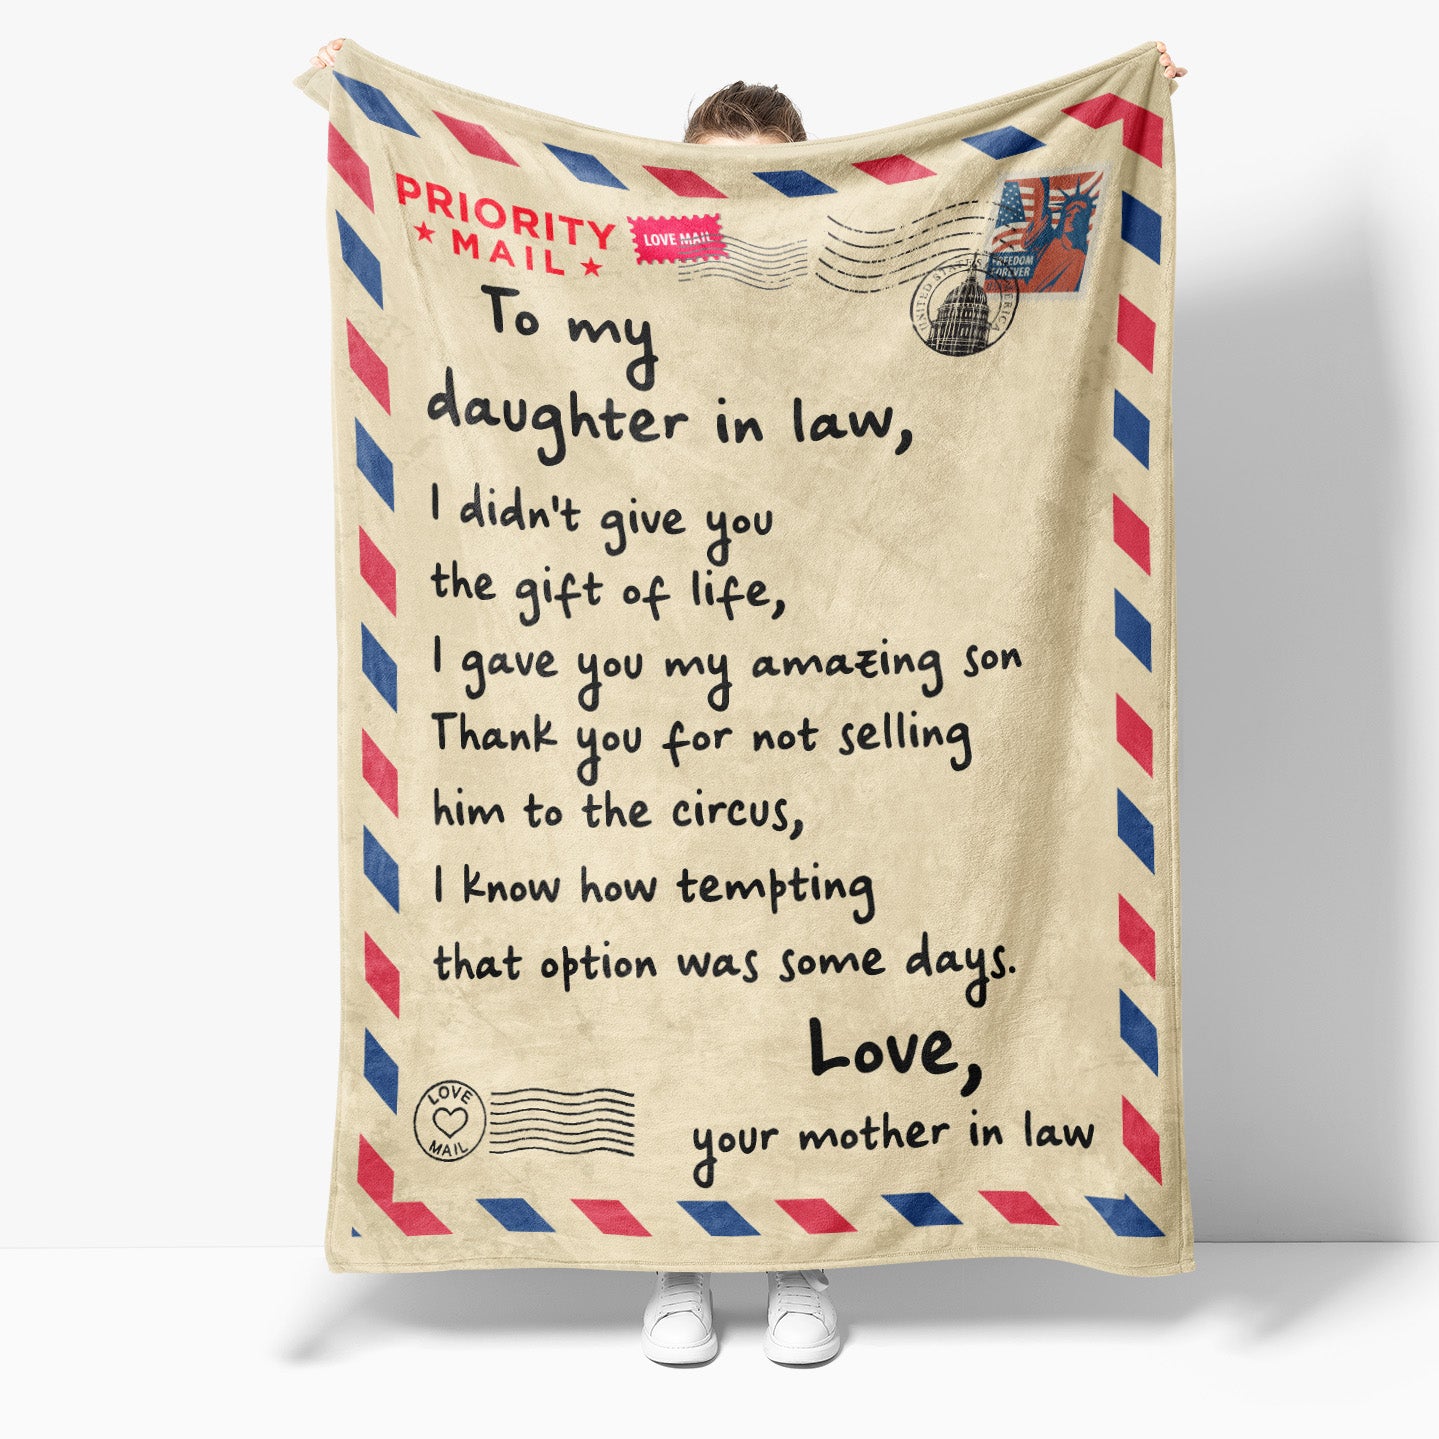 Blanket Gift For Daughter In Law, Future Daughter In Law Gifts, The Gift of Life